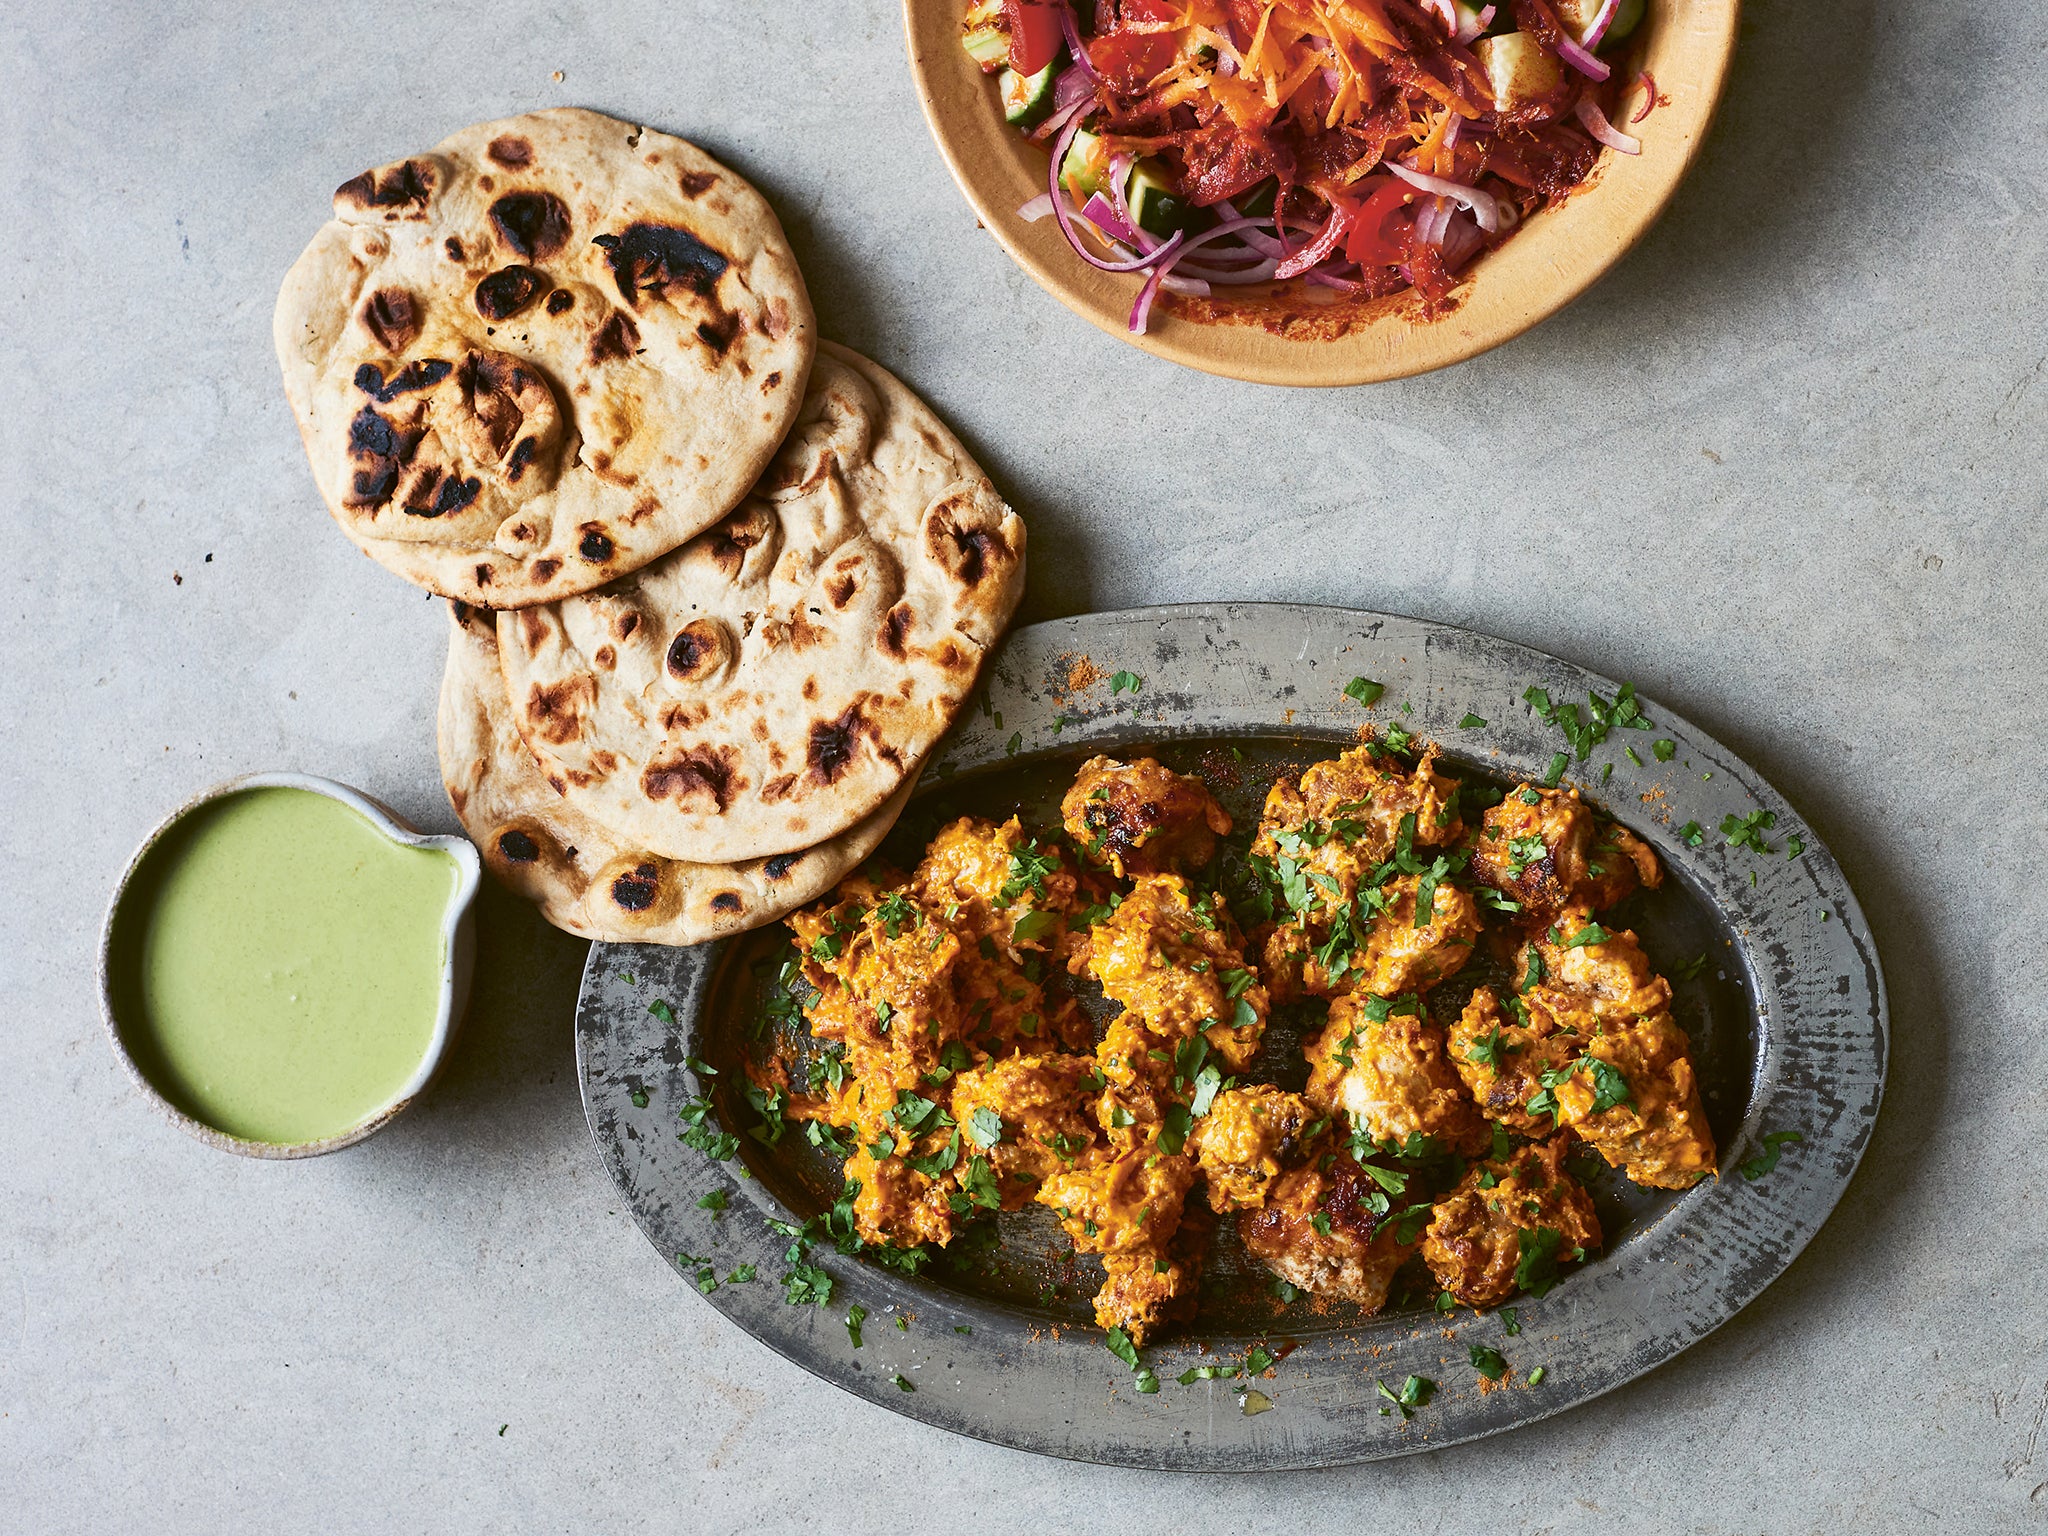 Serve with salad and roti for a crowd-pleasing meal